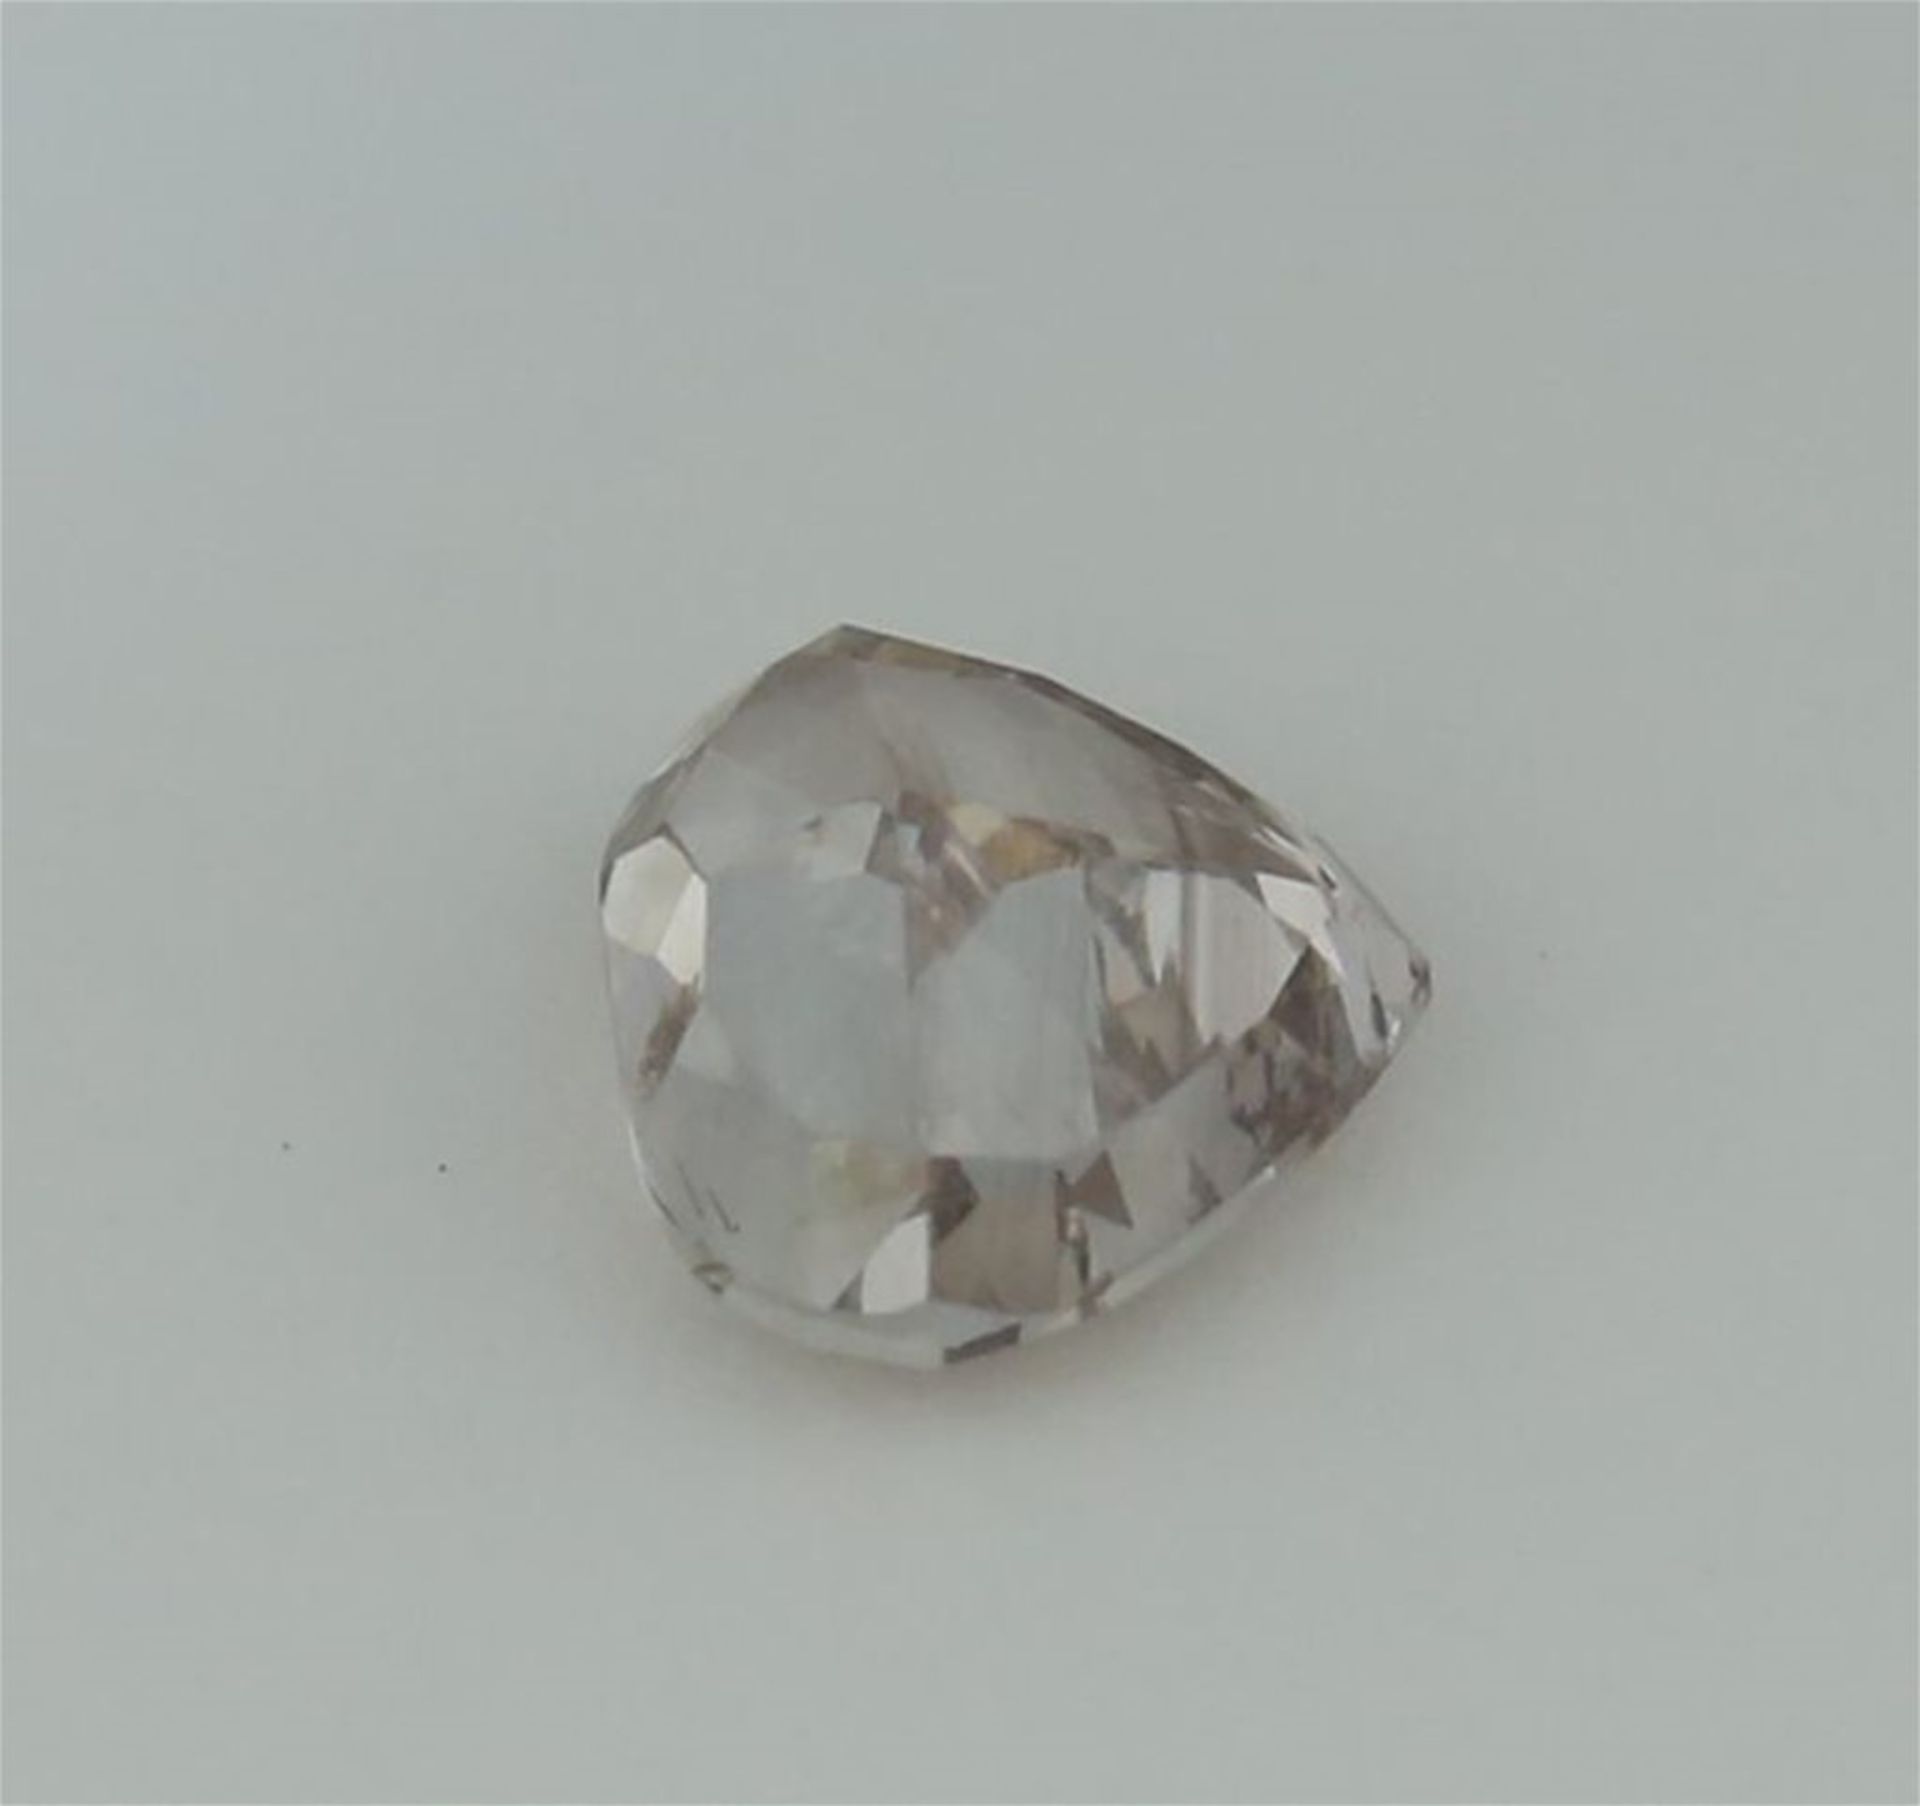 IGI Certified 0.52 ct. Pear Modified Brilliant Diamond - Very Light Brown - SI 2 UNTREATED - Image 9 of 9